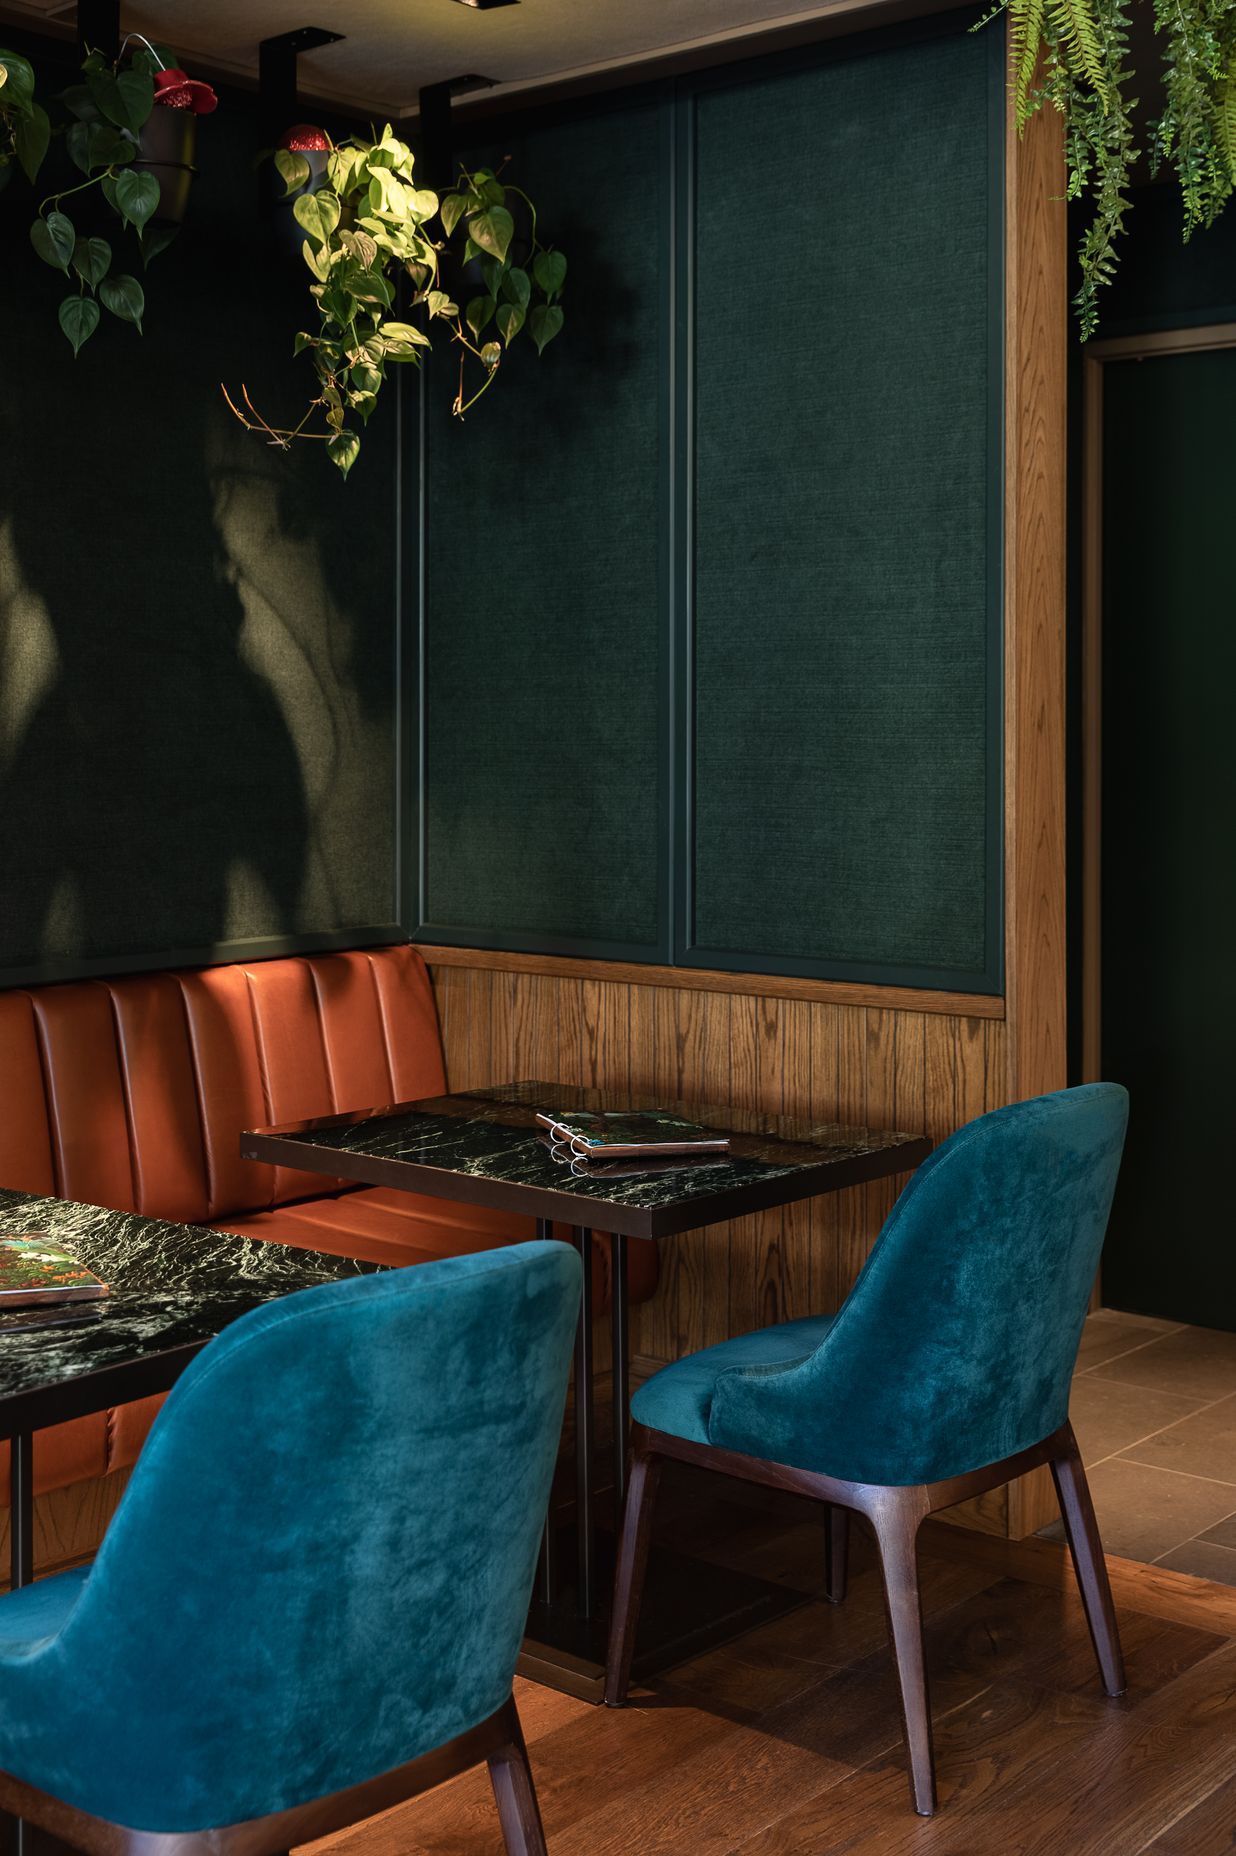 The Our Land is Alive bar creates a cosy mood with darker, earthy hues and textures.